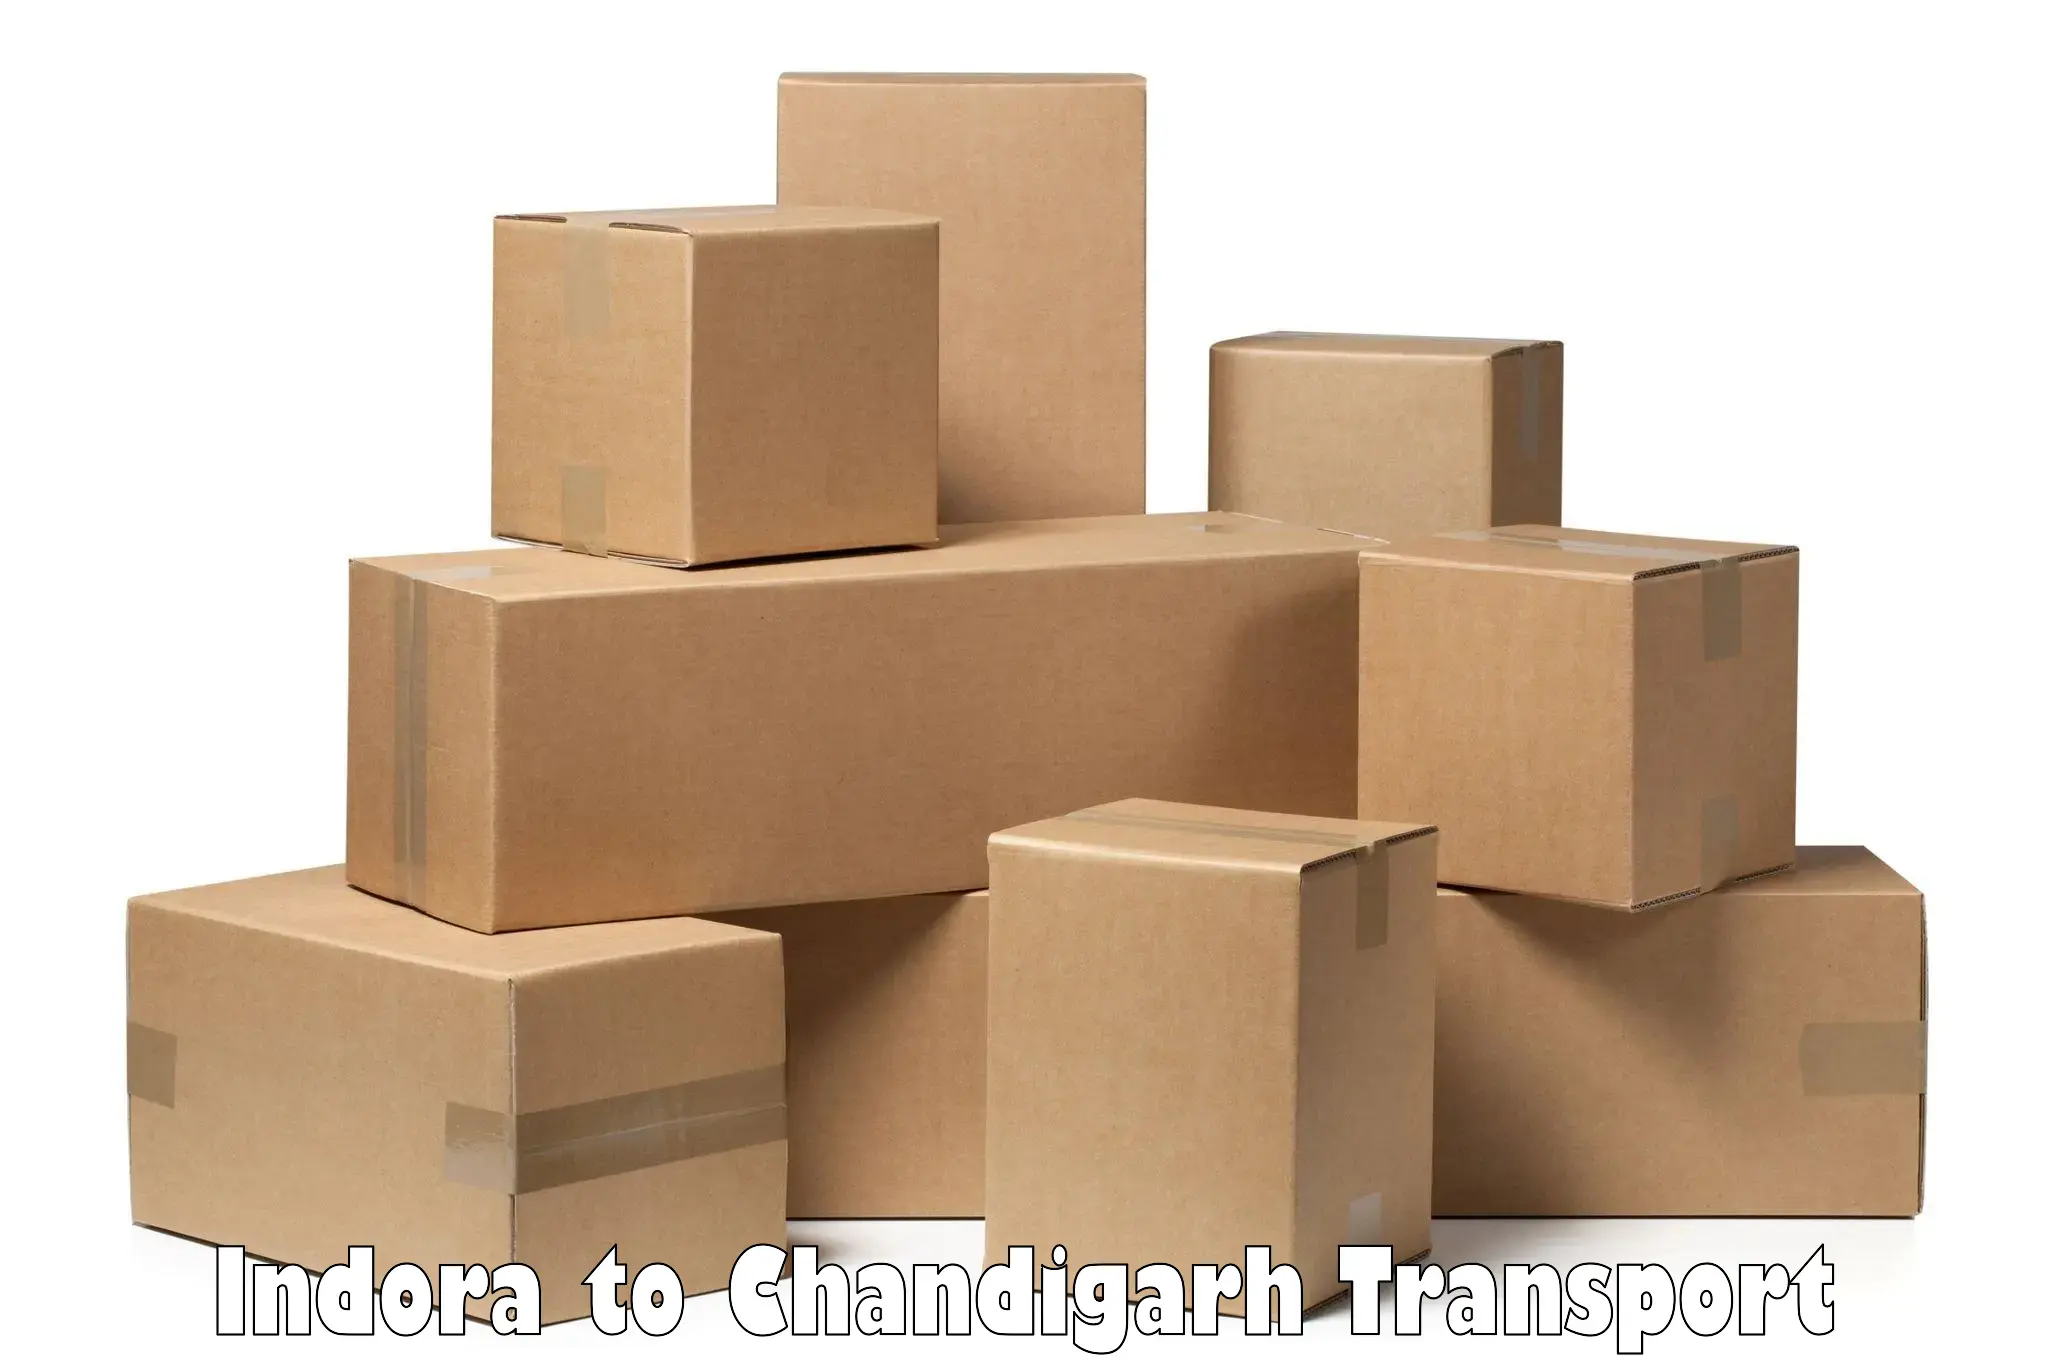 Transport bike from one state to another Indora to Chandigarh